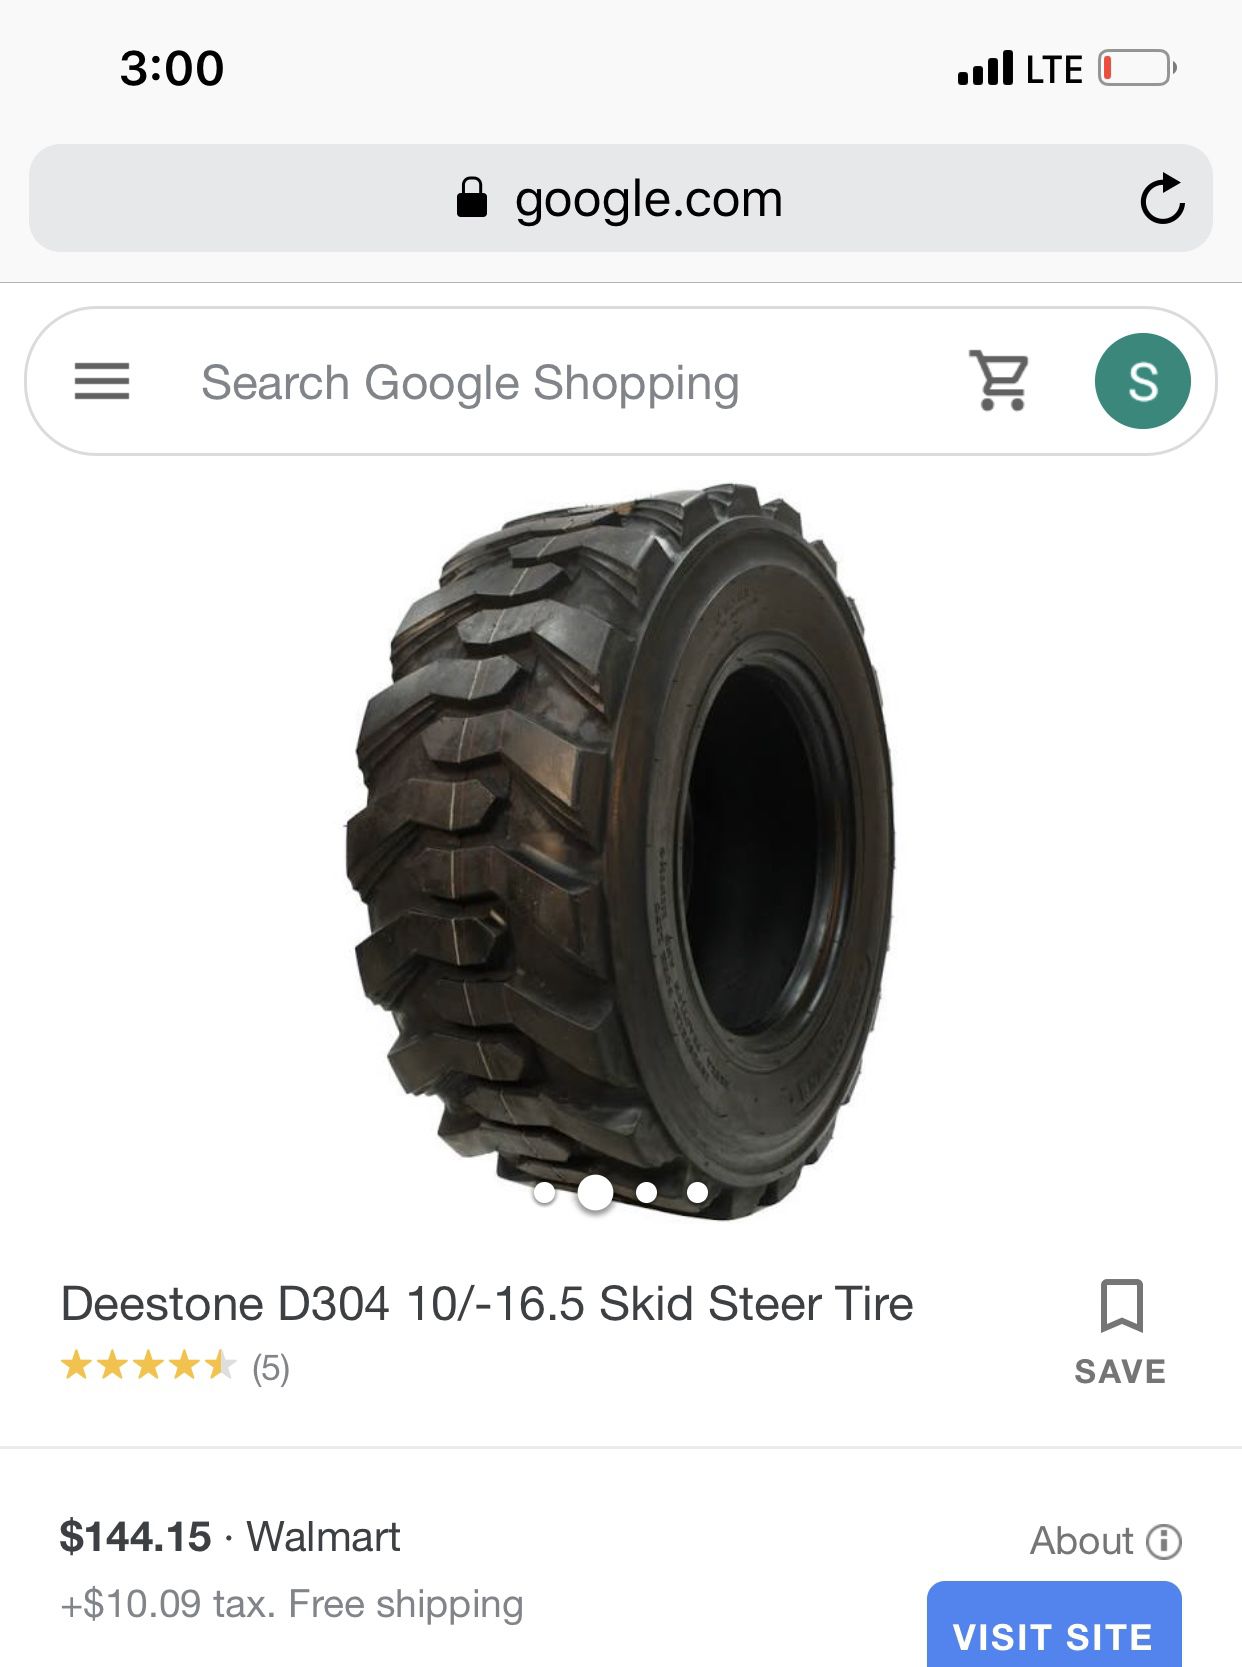 Tires for workouts etc